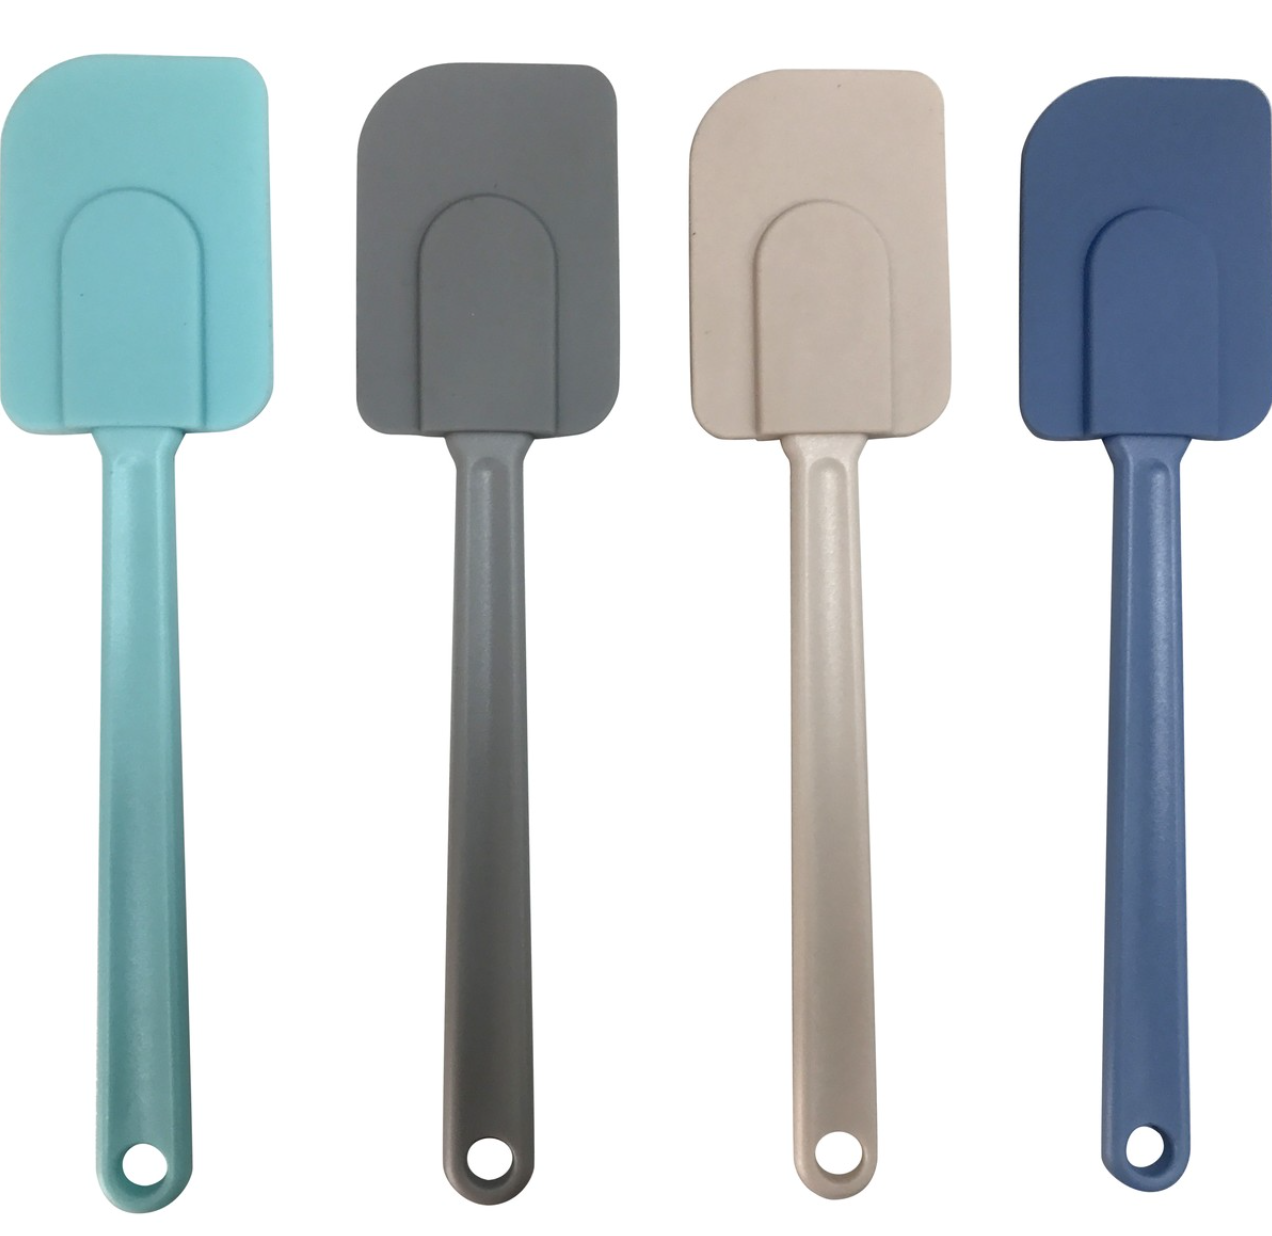 These Spatula things